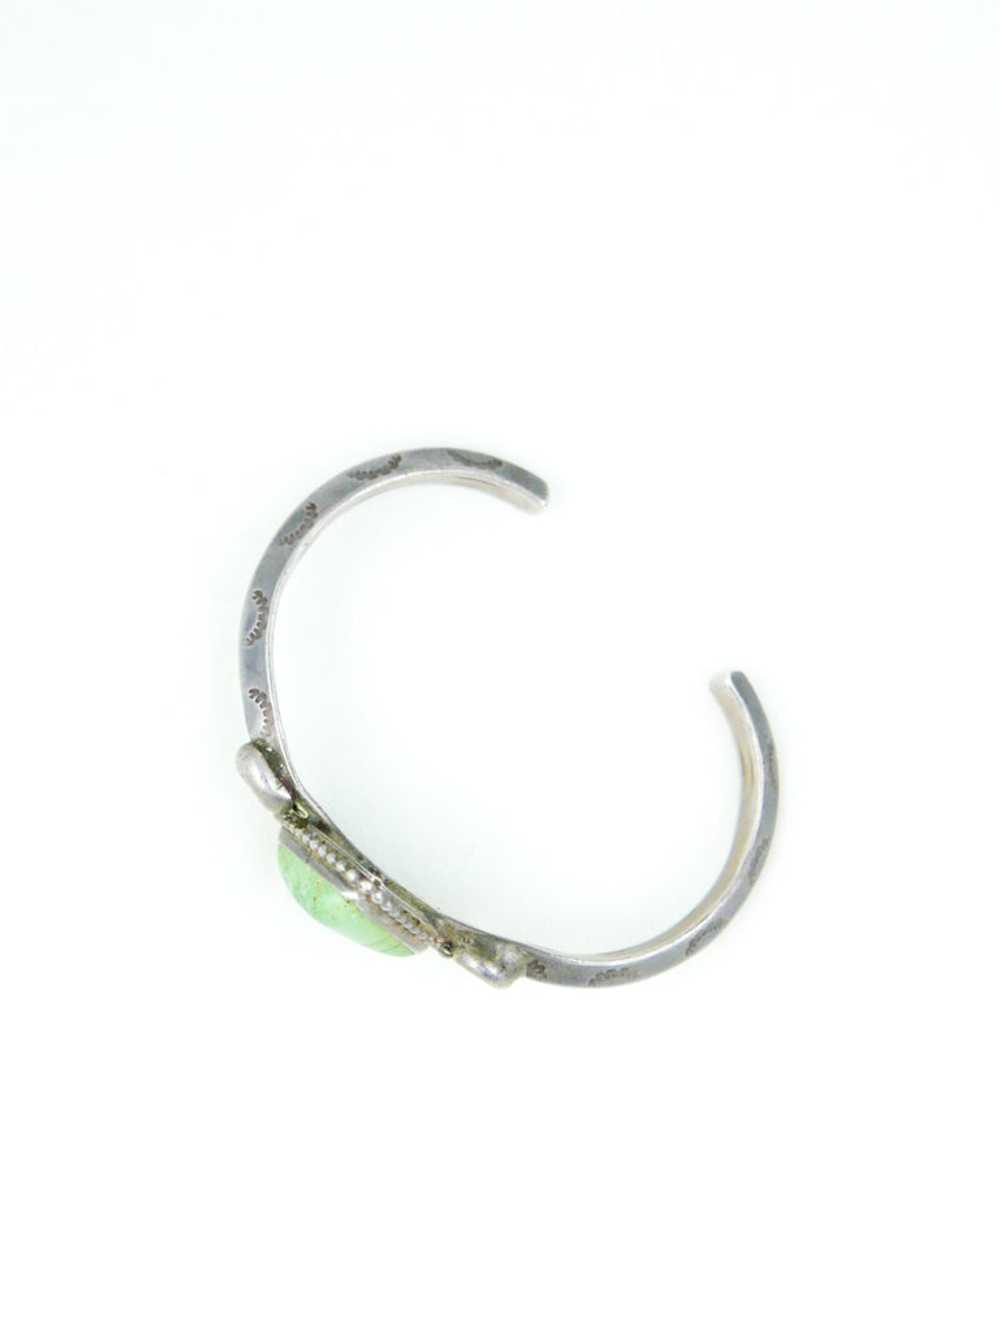 Green Turquoise Cuff - image 8